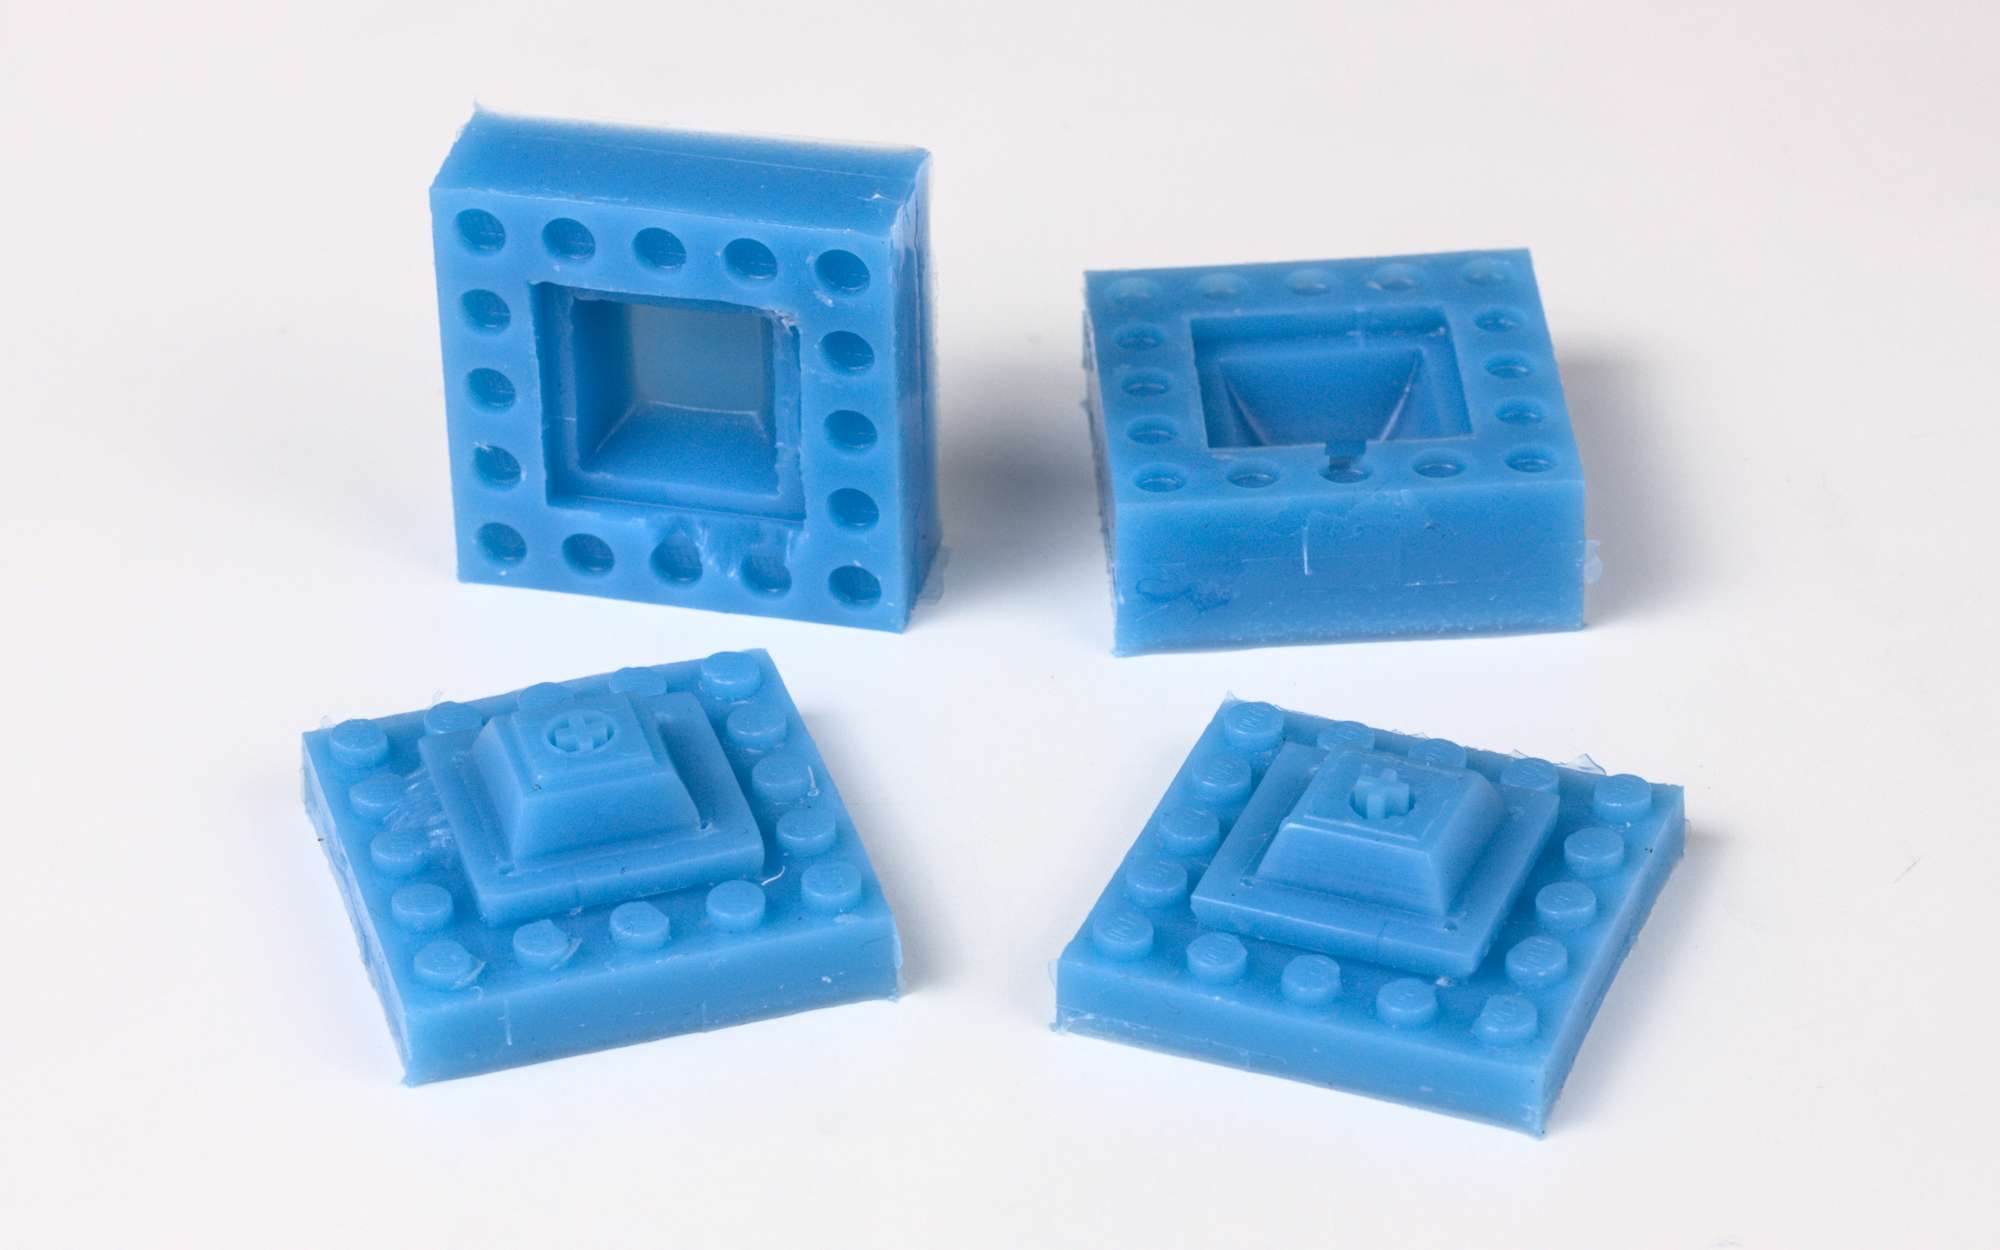 Silicone keycap moulds